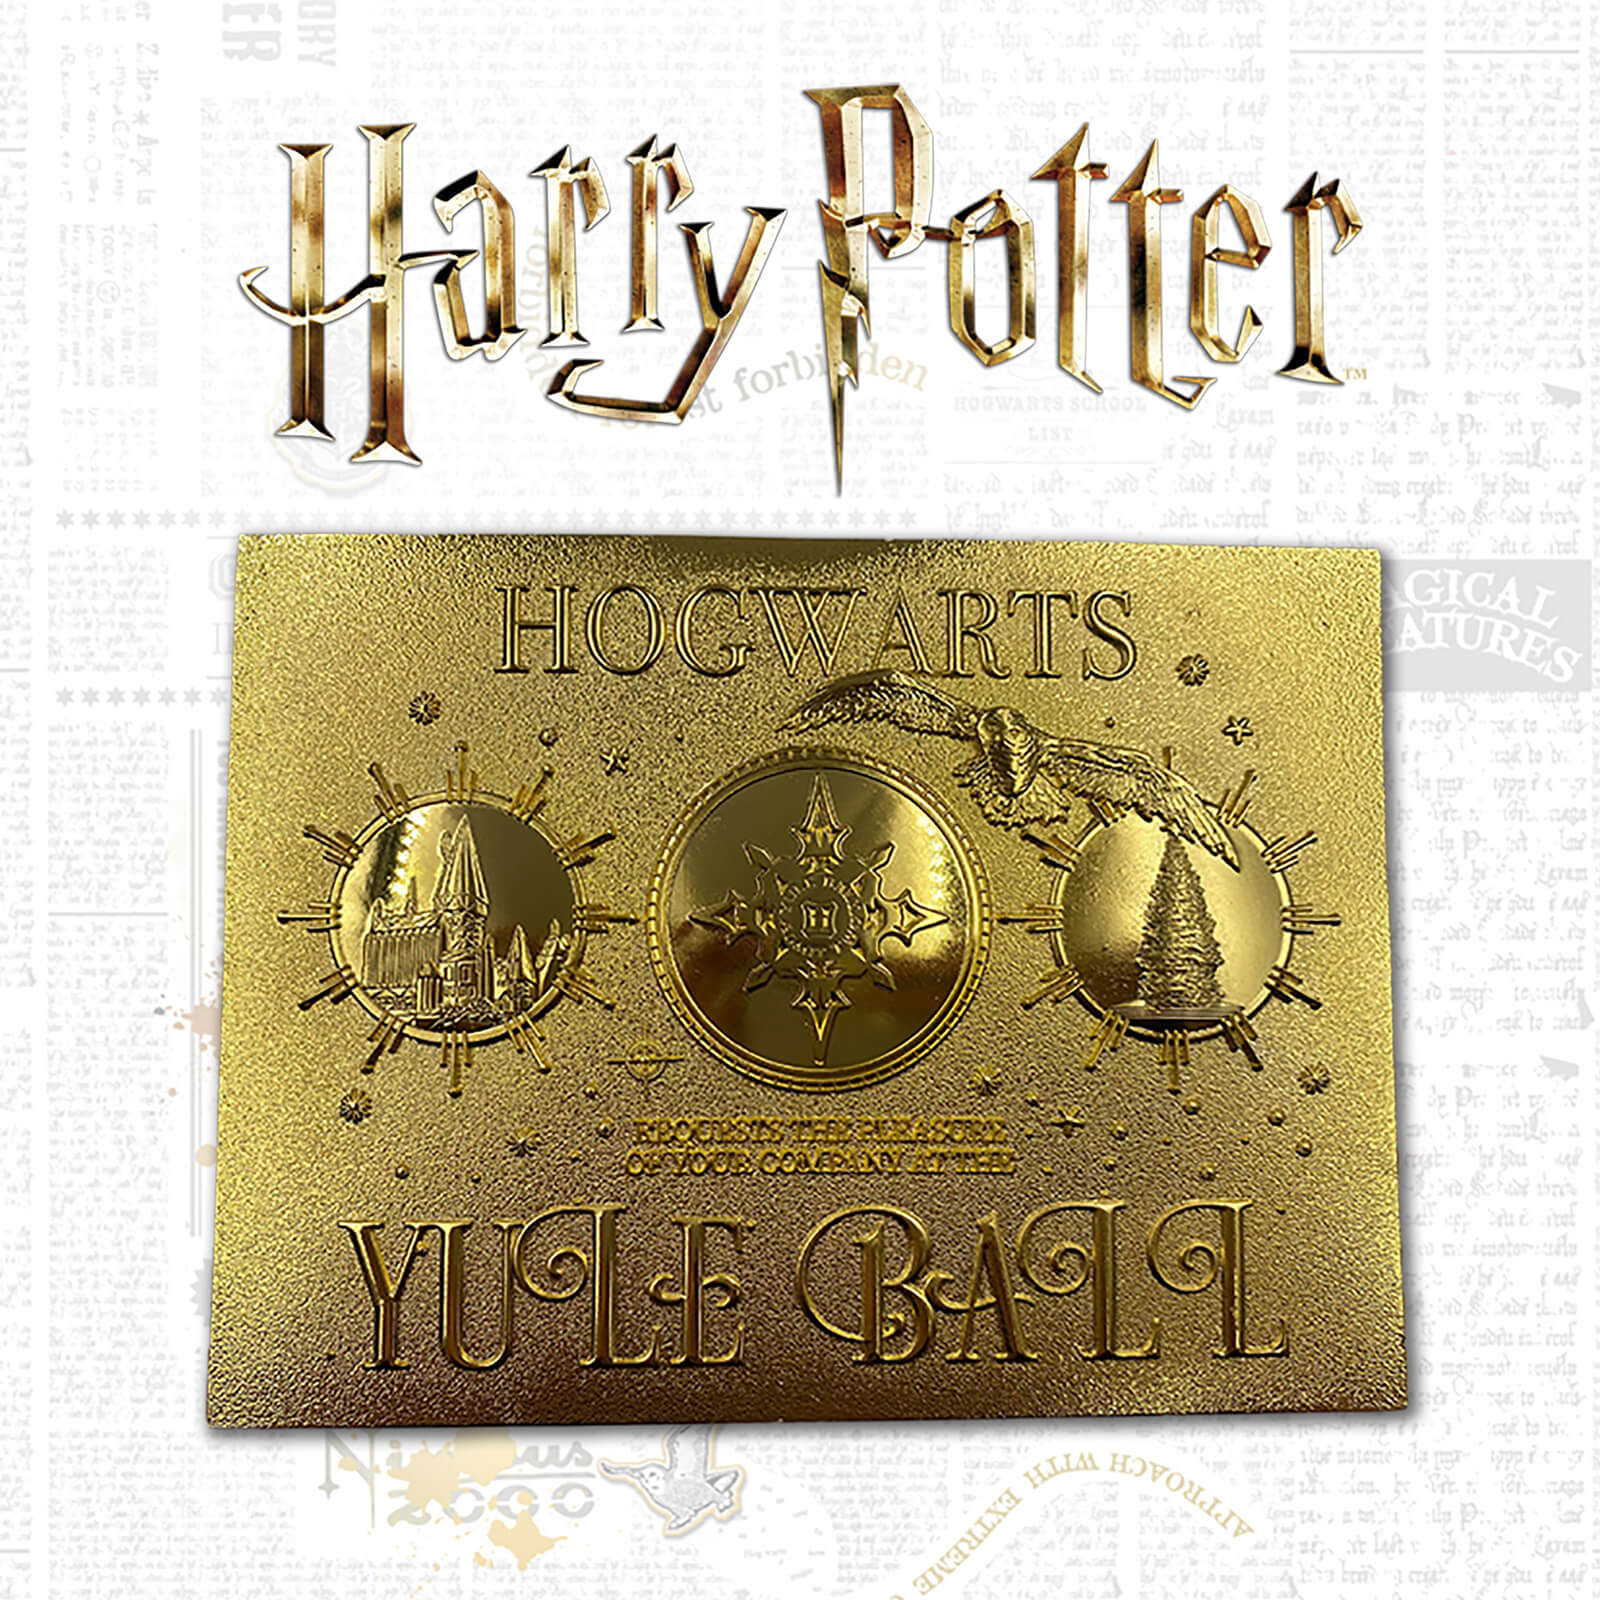 Harry Potter 24K Gold Plated Yule Ball Ticket Limited Edition Replica - Zavvi Exclusive von Harry Potter